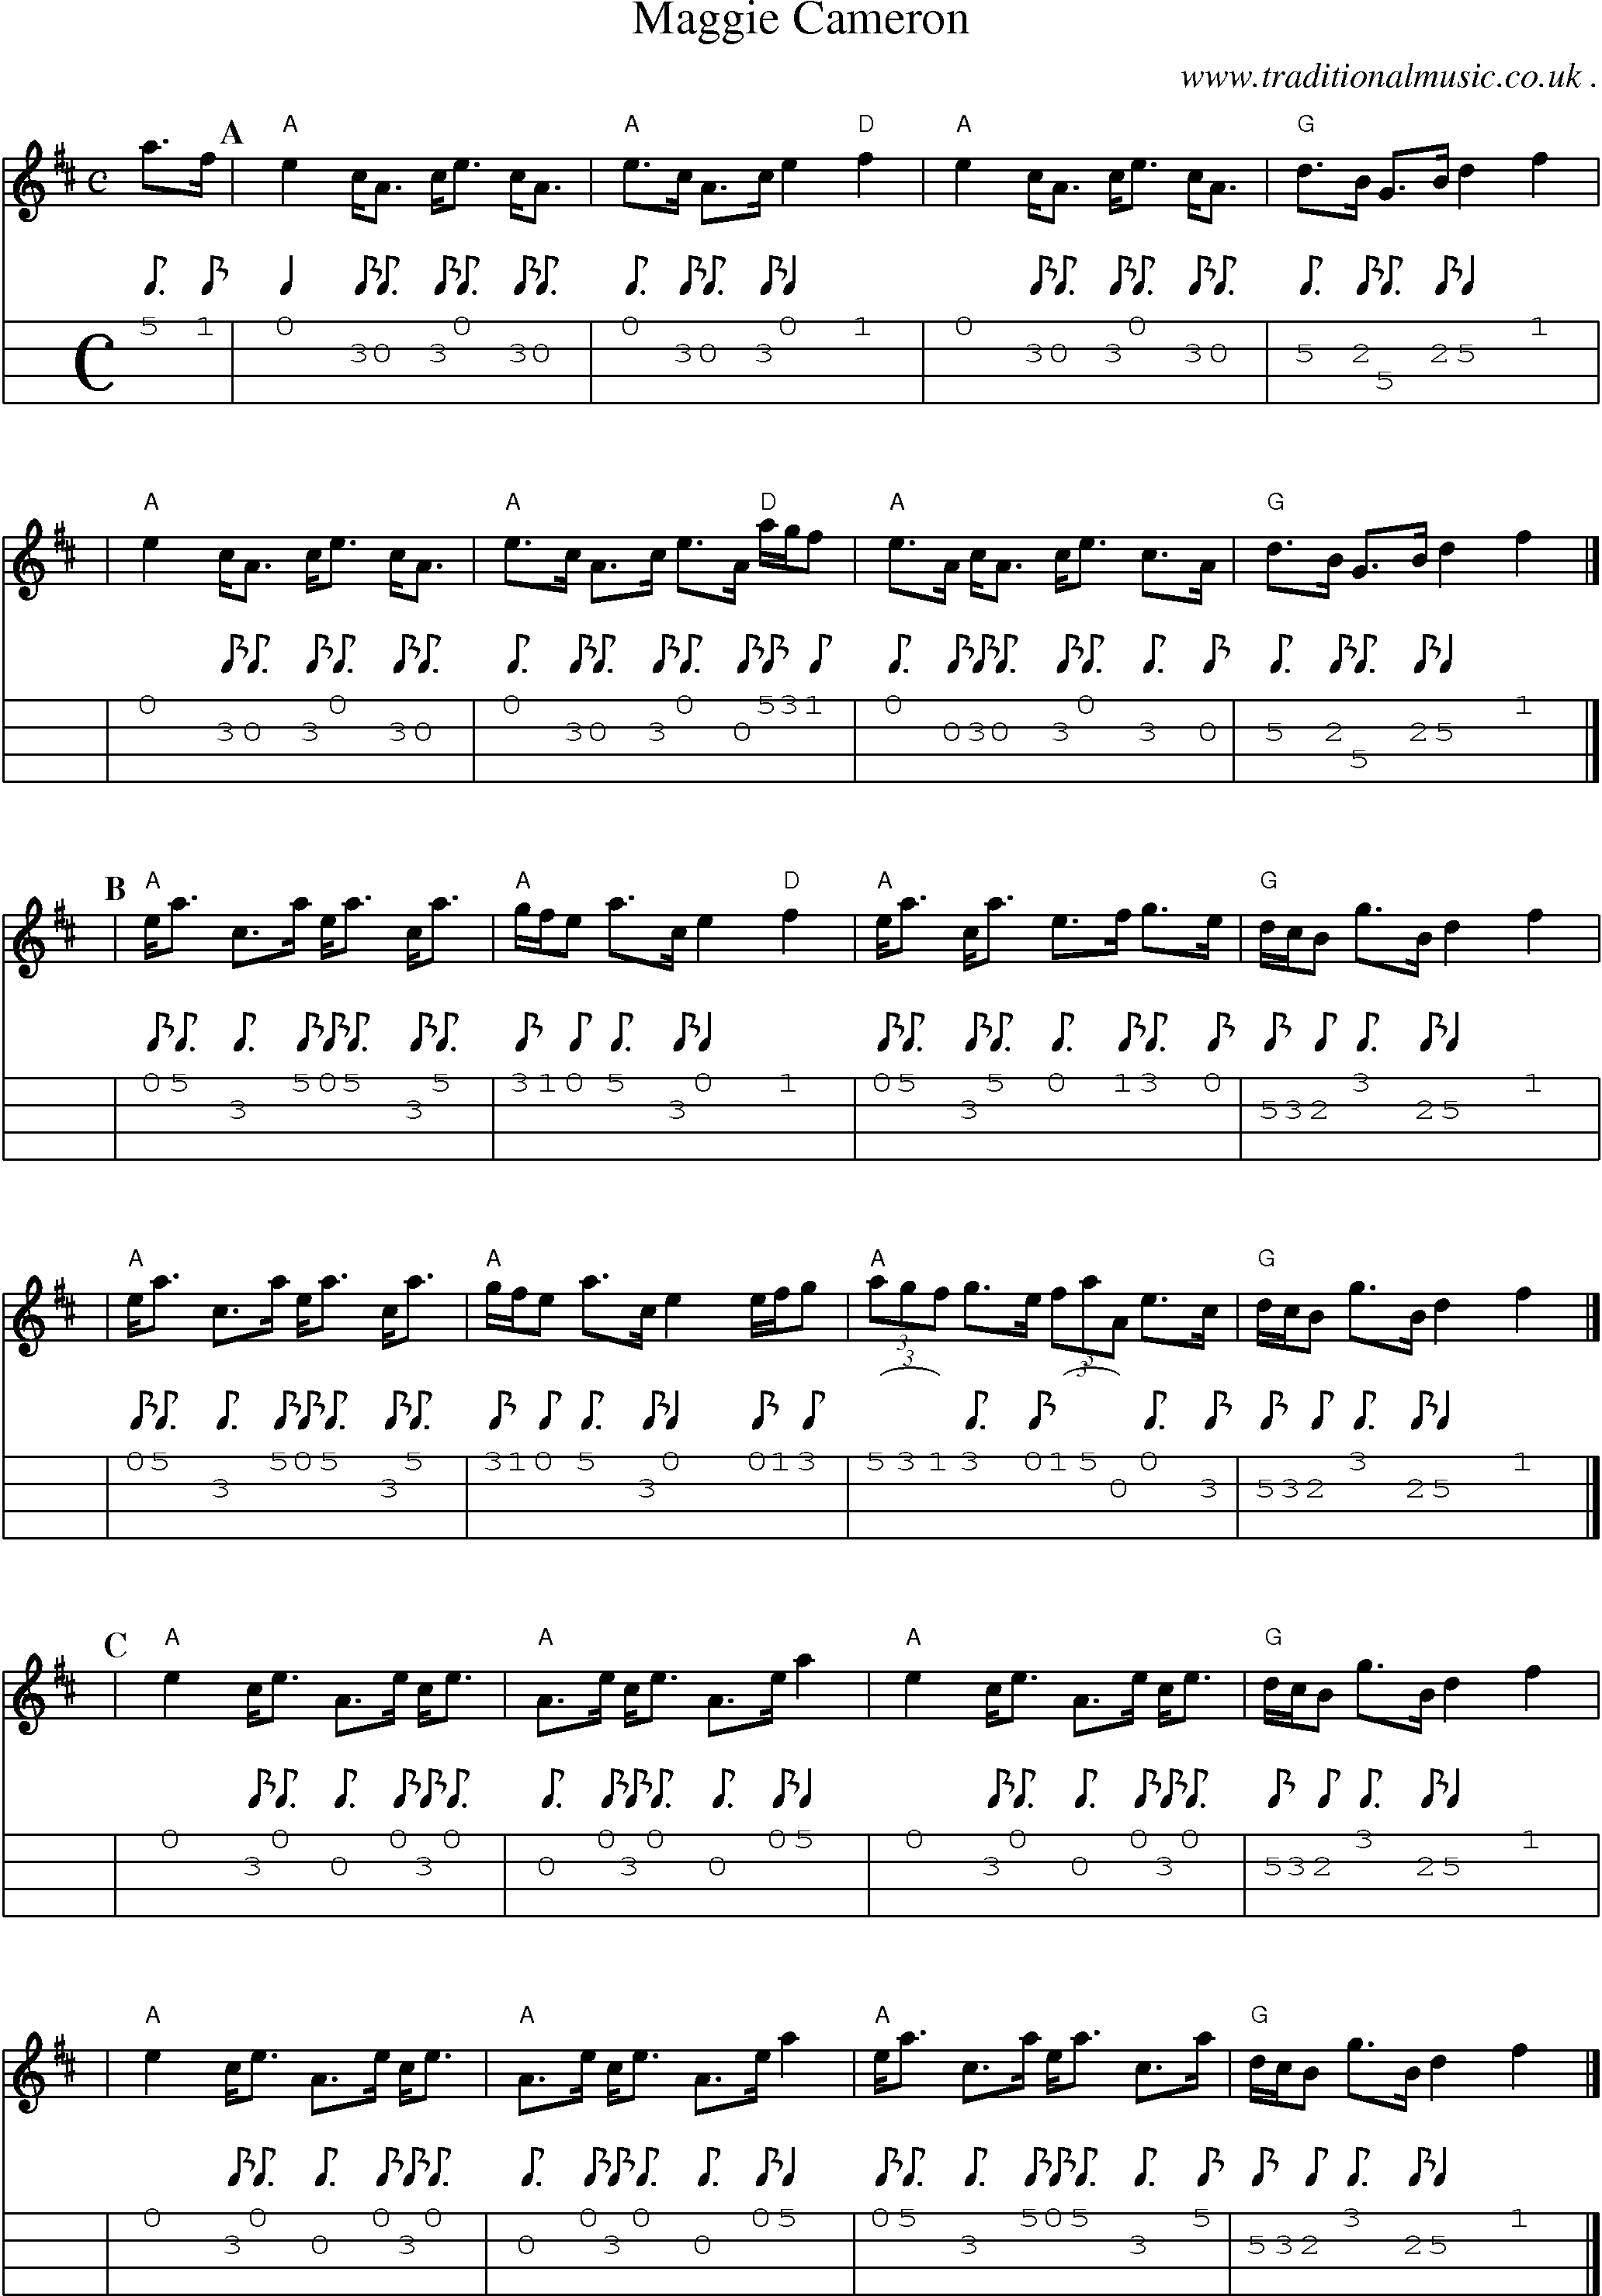 Sheet-music  score, Chords and Mandolin Tabs for Maggie Cameron